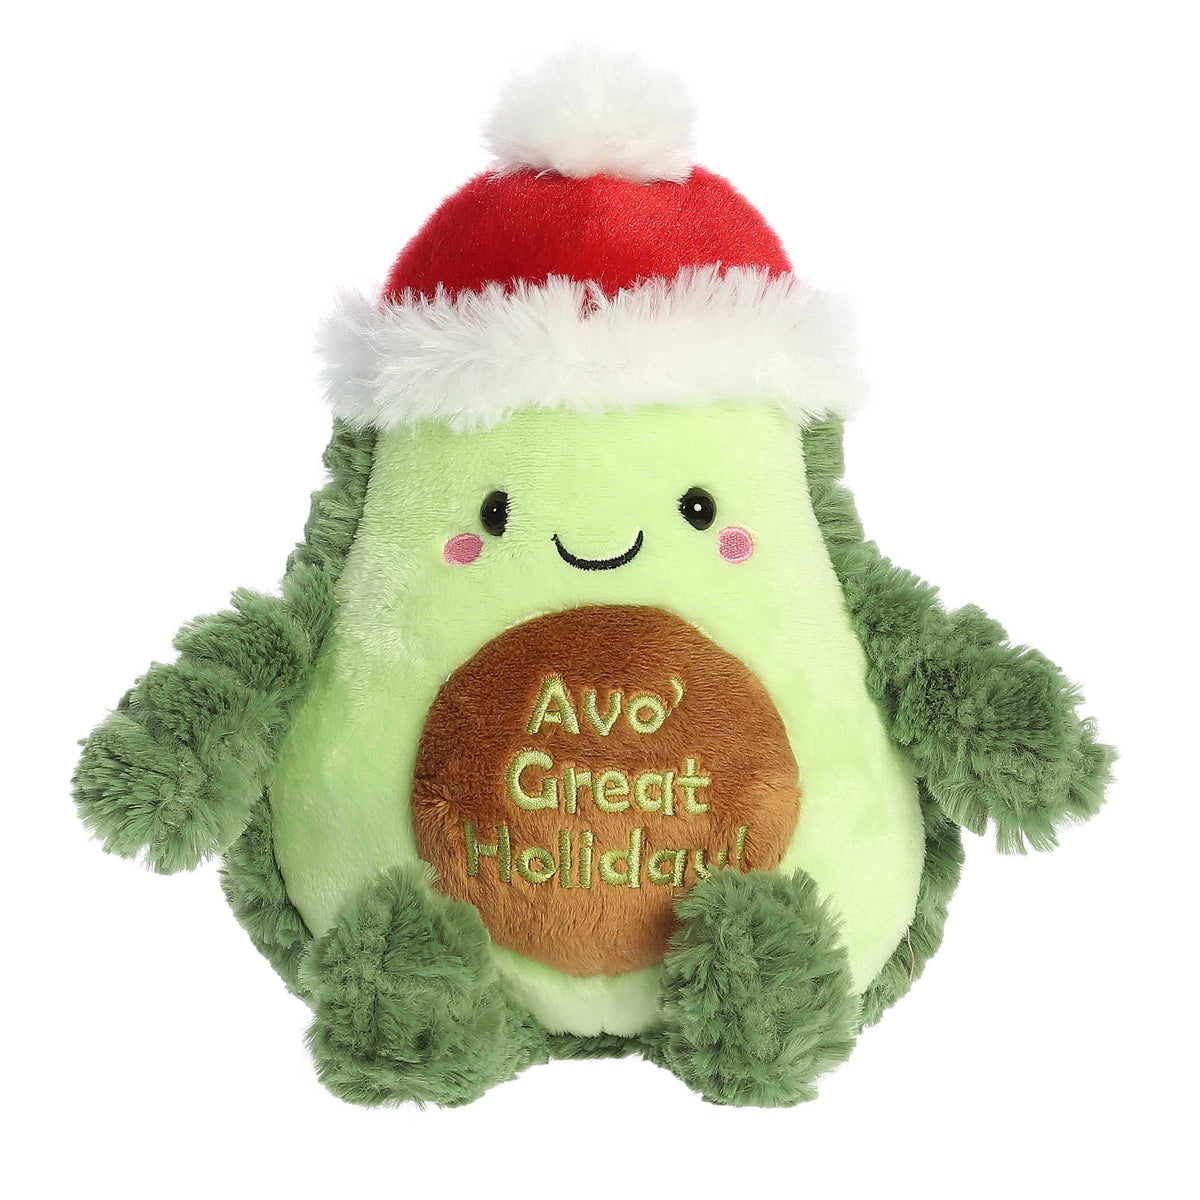 Avocado plush toy with textured green exterior and lighter softer interior wearing a santa hat embroidered with "Avo' Great Holiday" on its pit